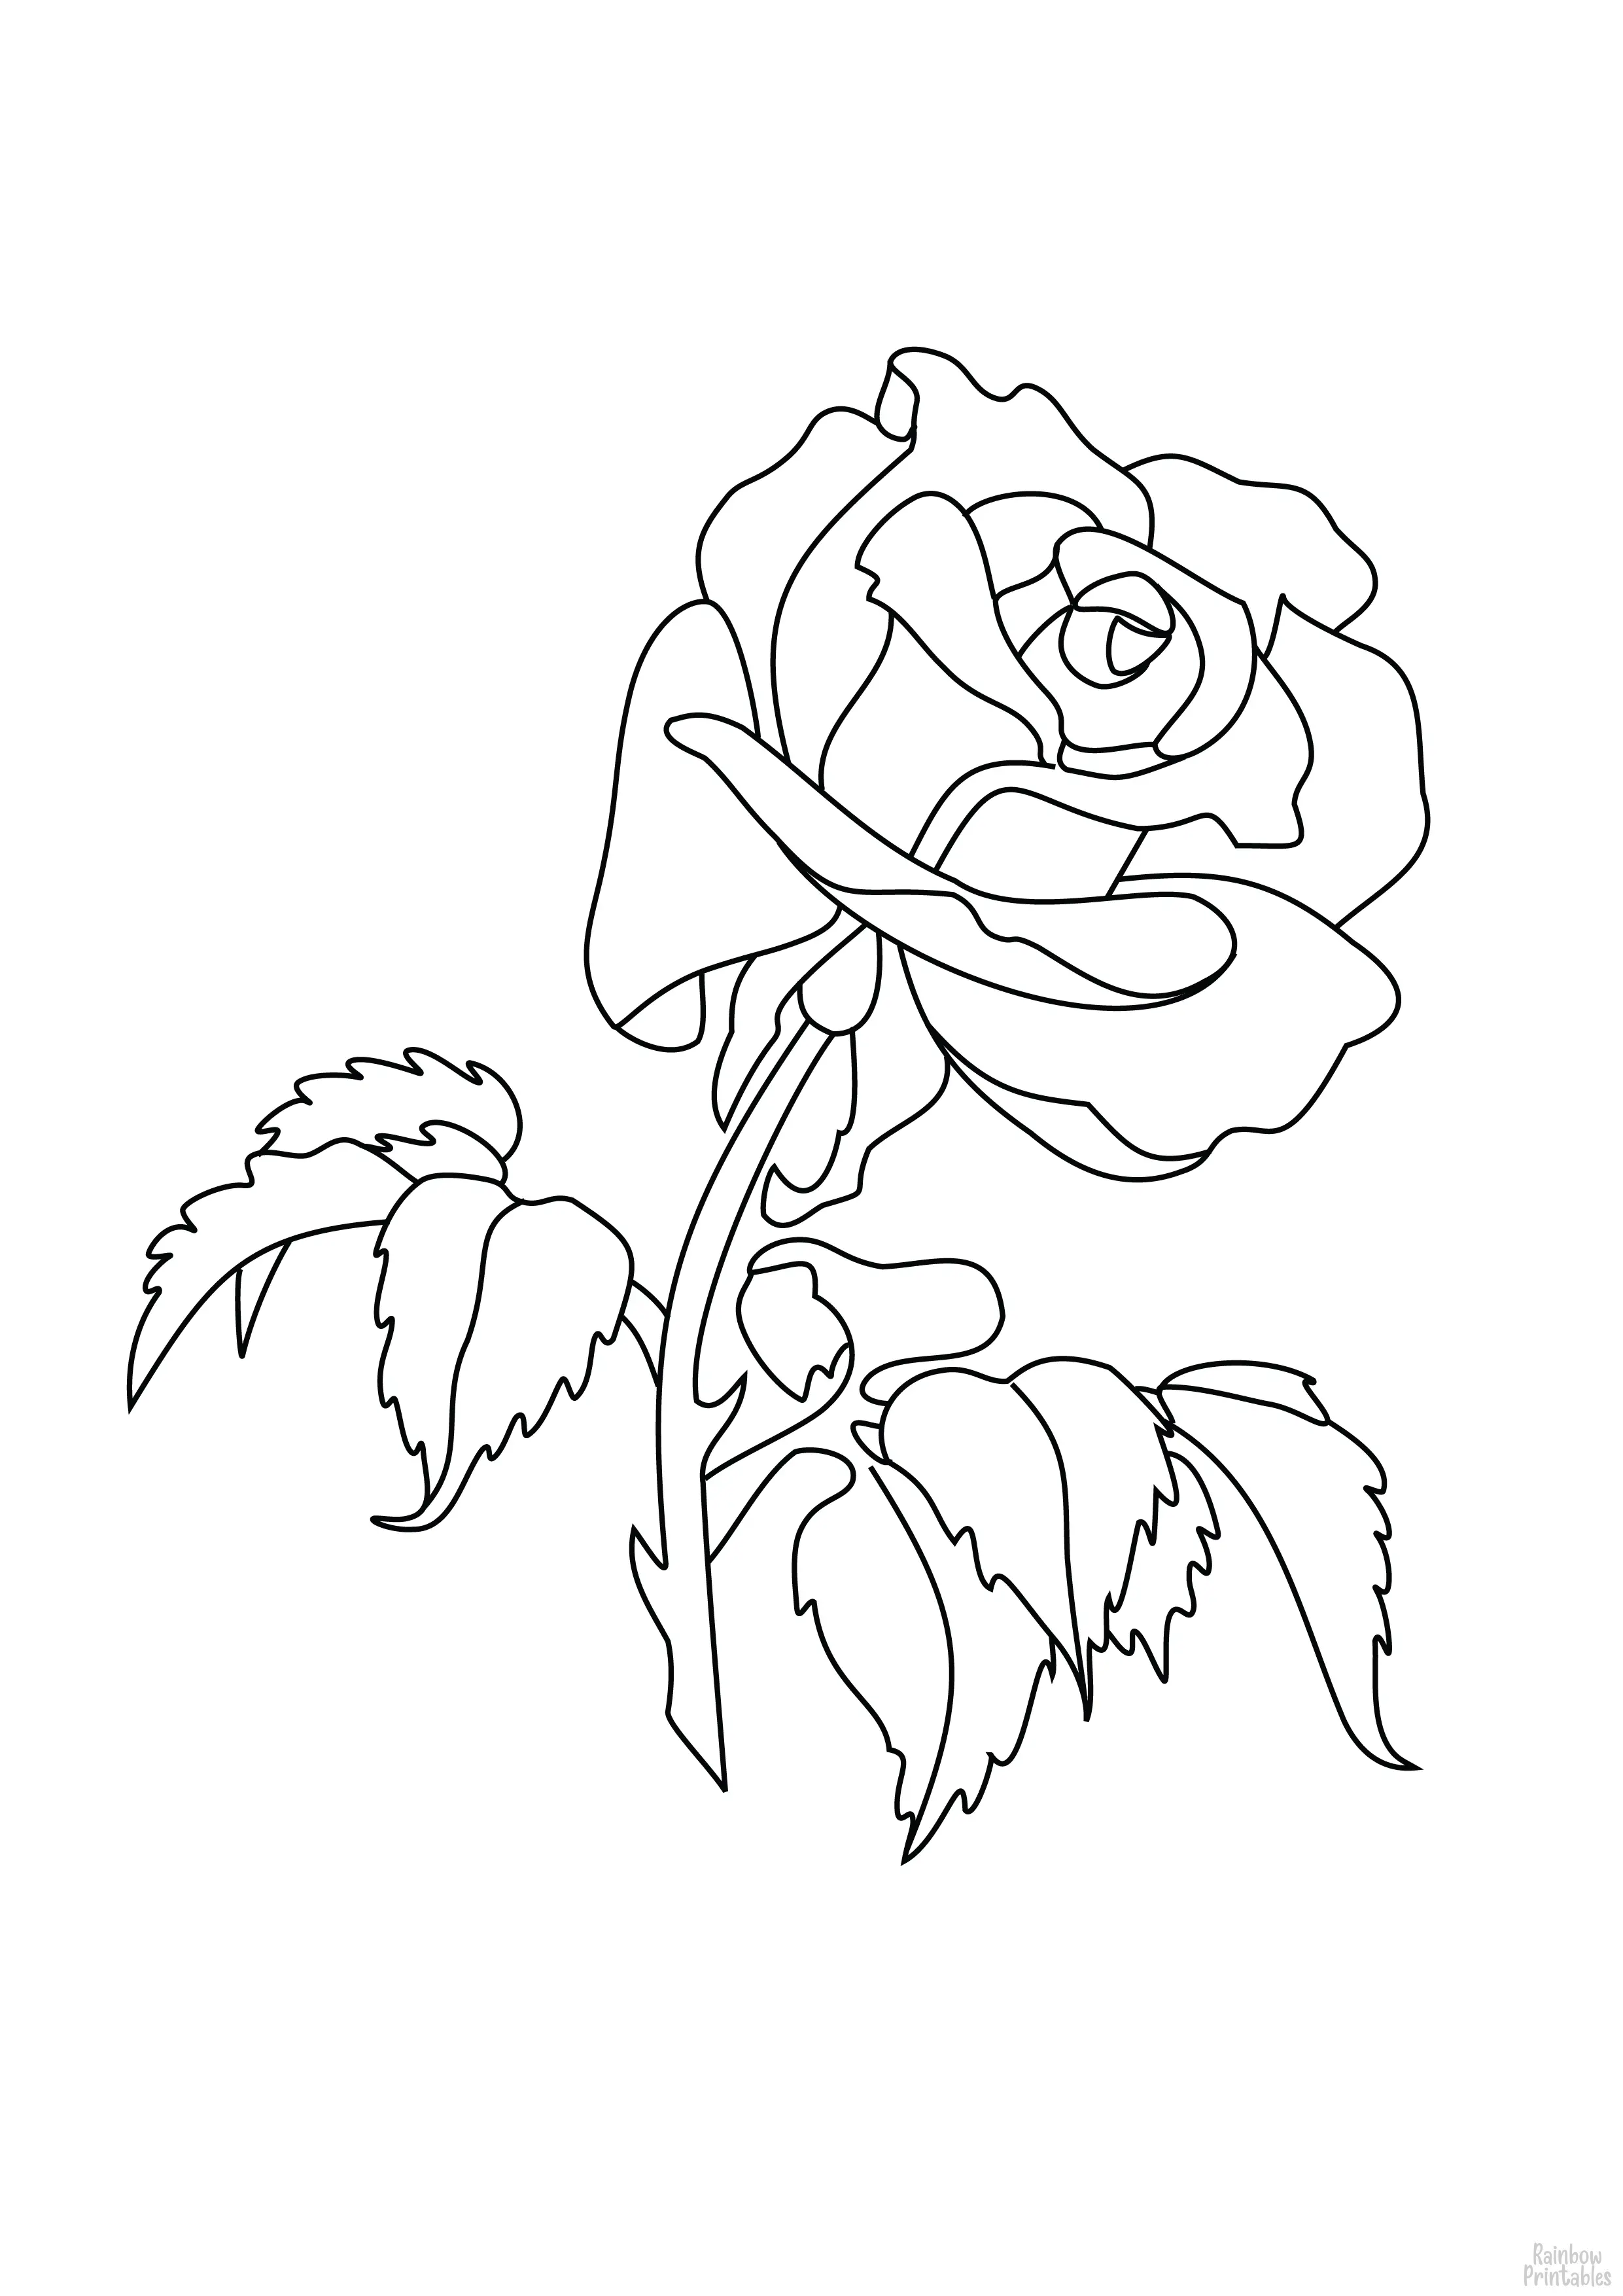 Free Coloring Pages for Kids